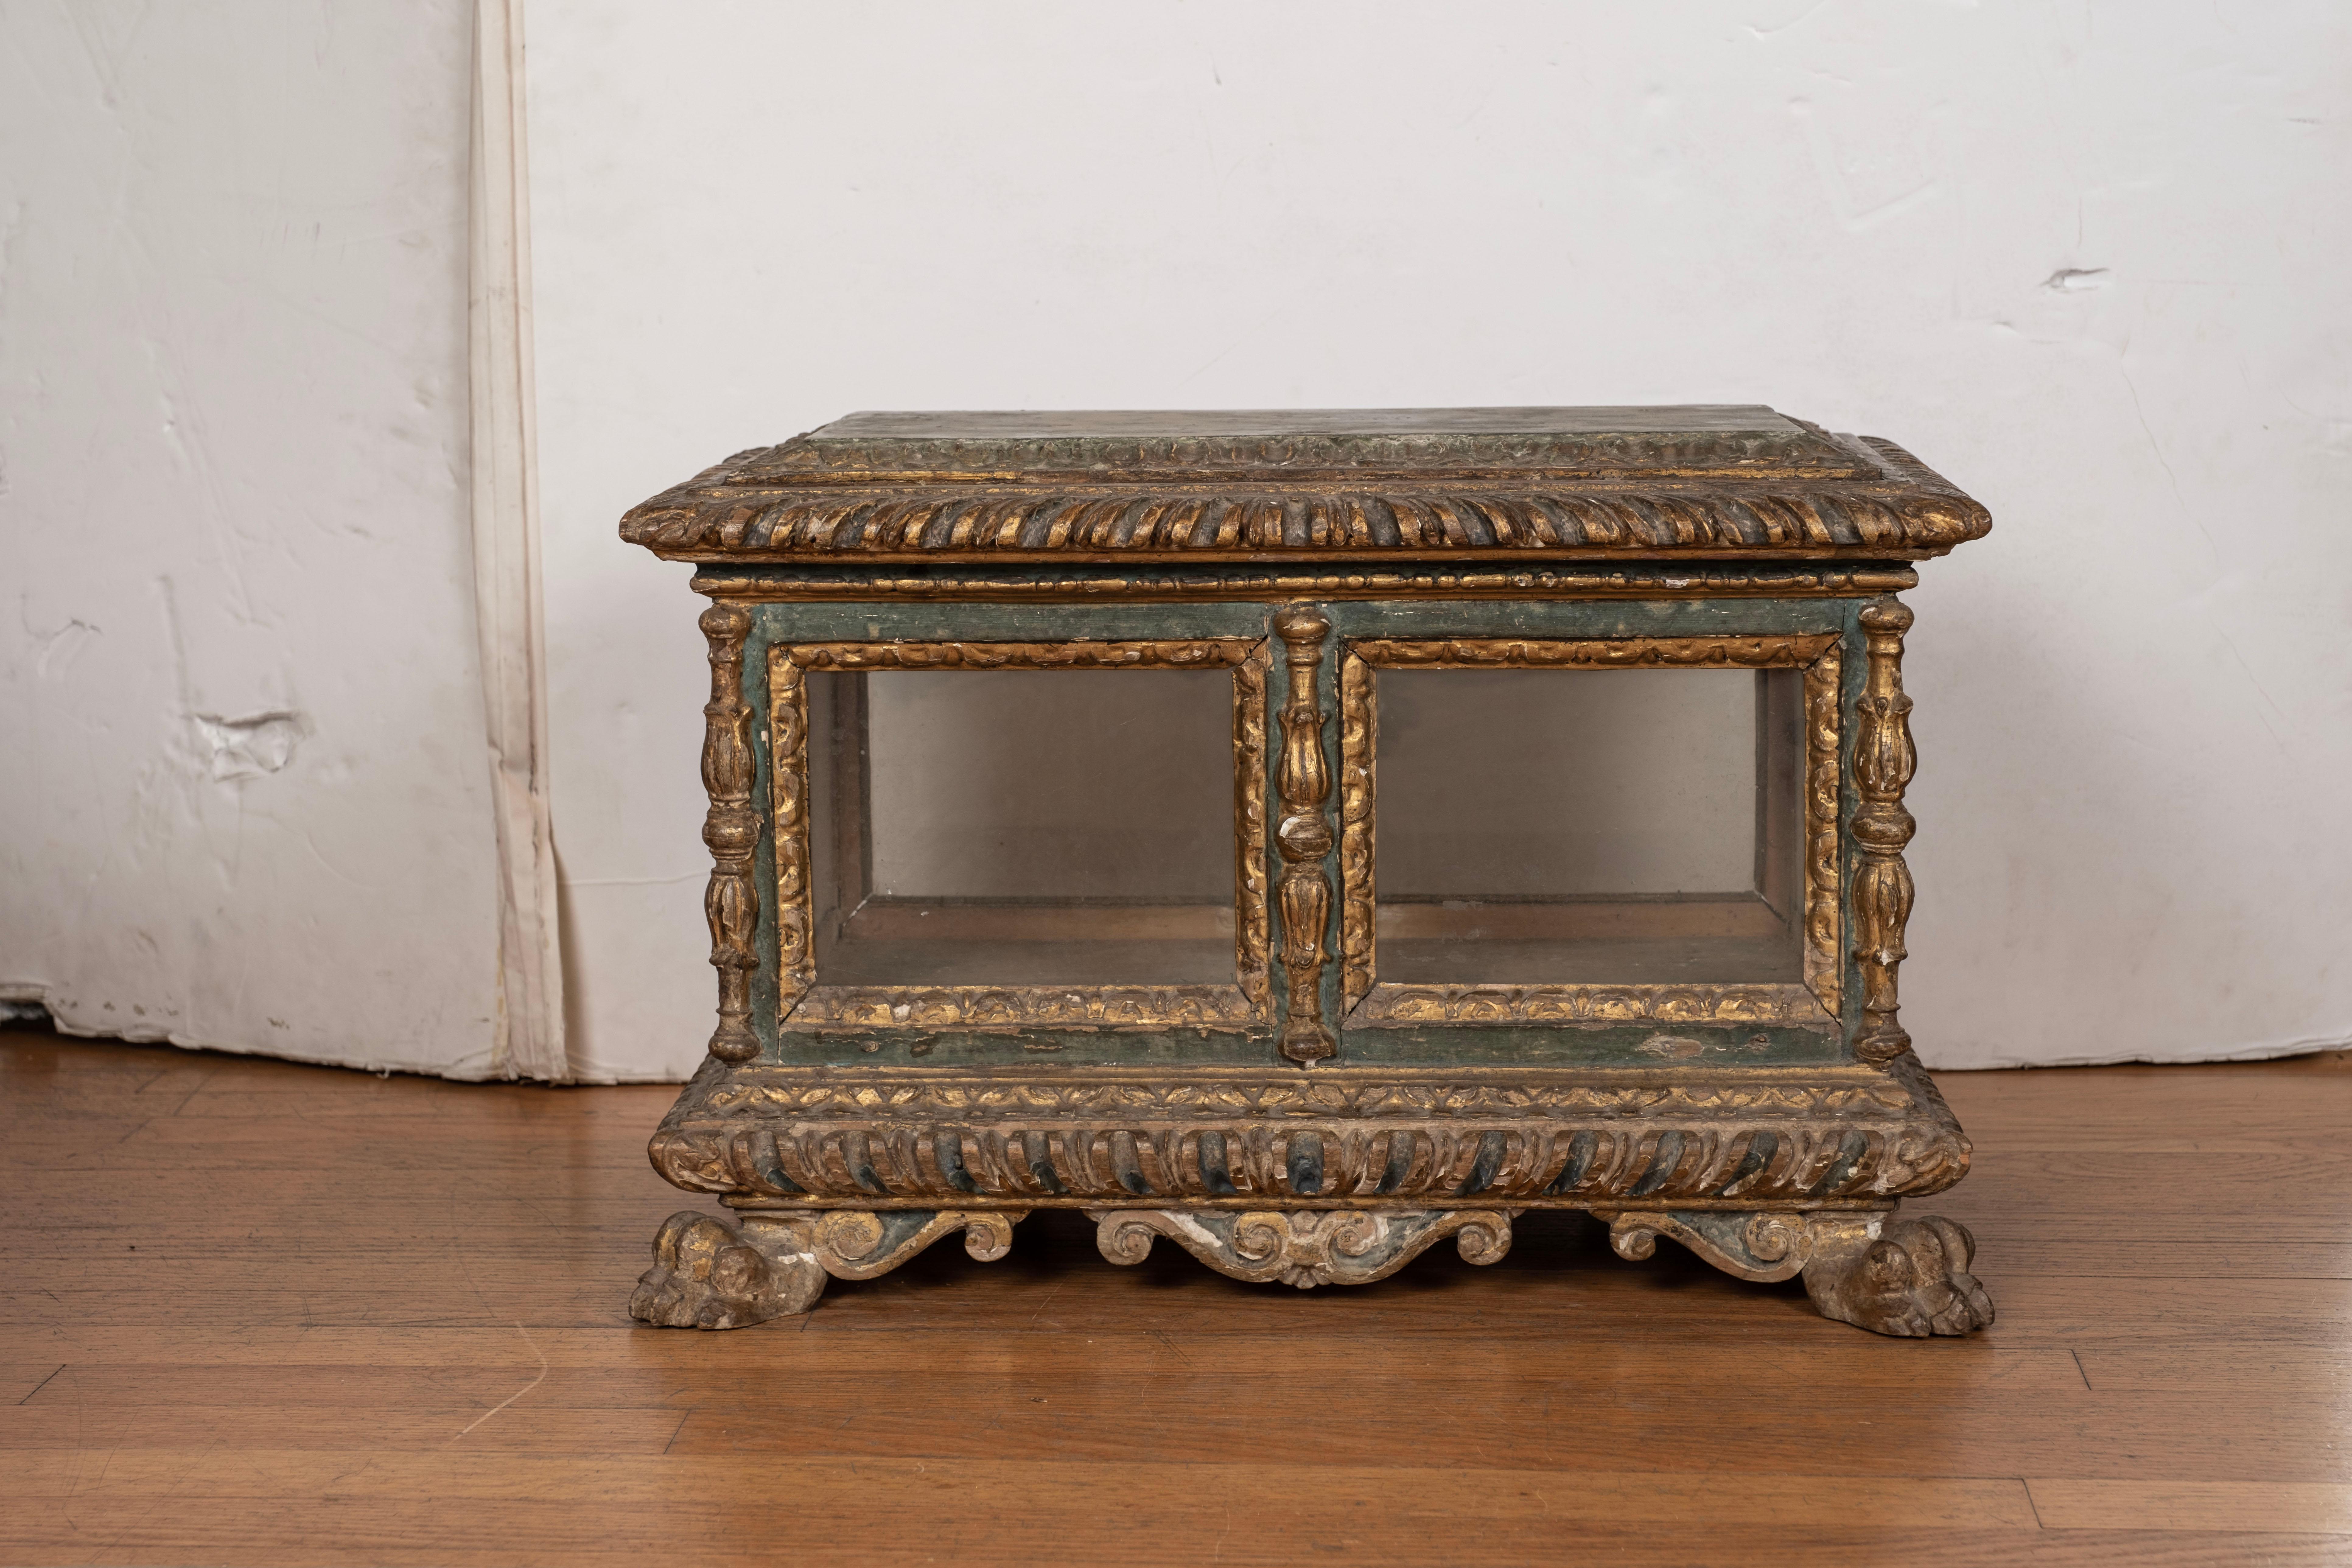 18th century Italian painted and parcel gilt reliquary box.
This lovely large Italian Baroque box is made of painted and parcel gilt wood surrounded by a glass front, sides and back.
This stunning 18th century reliquary box or decorative box can